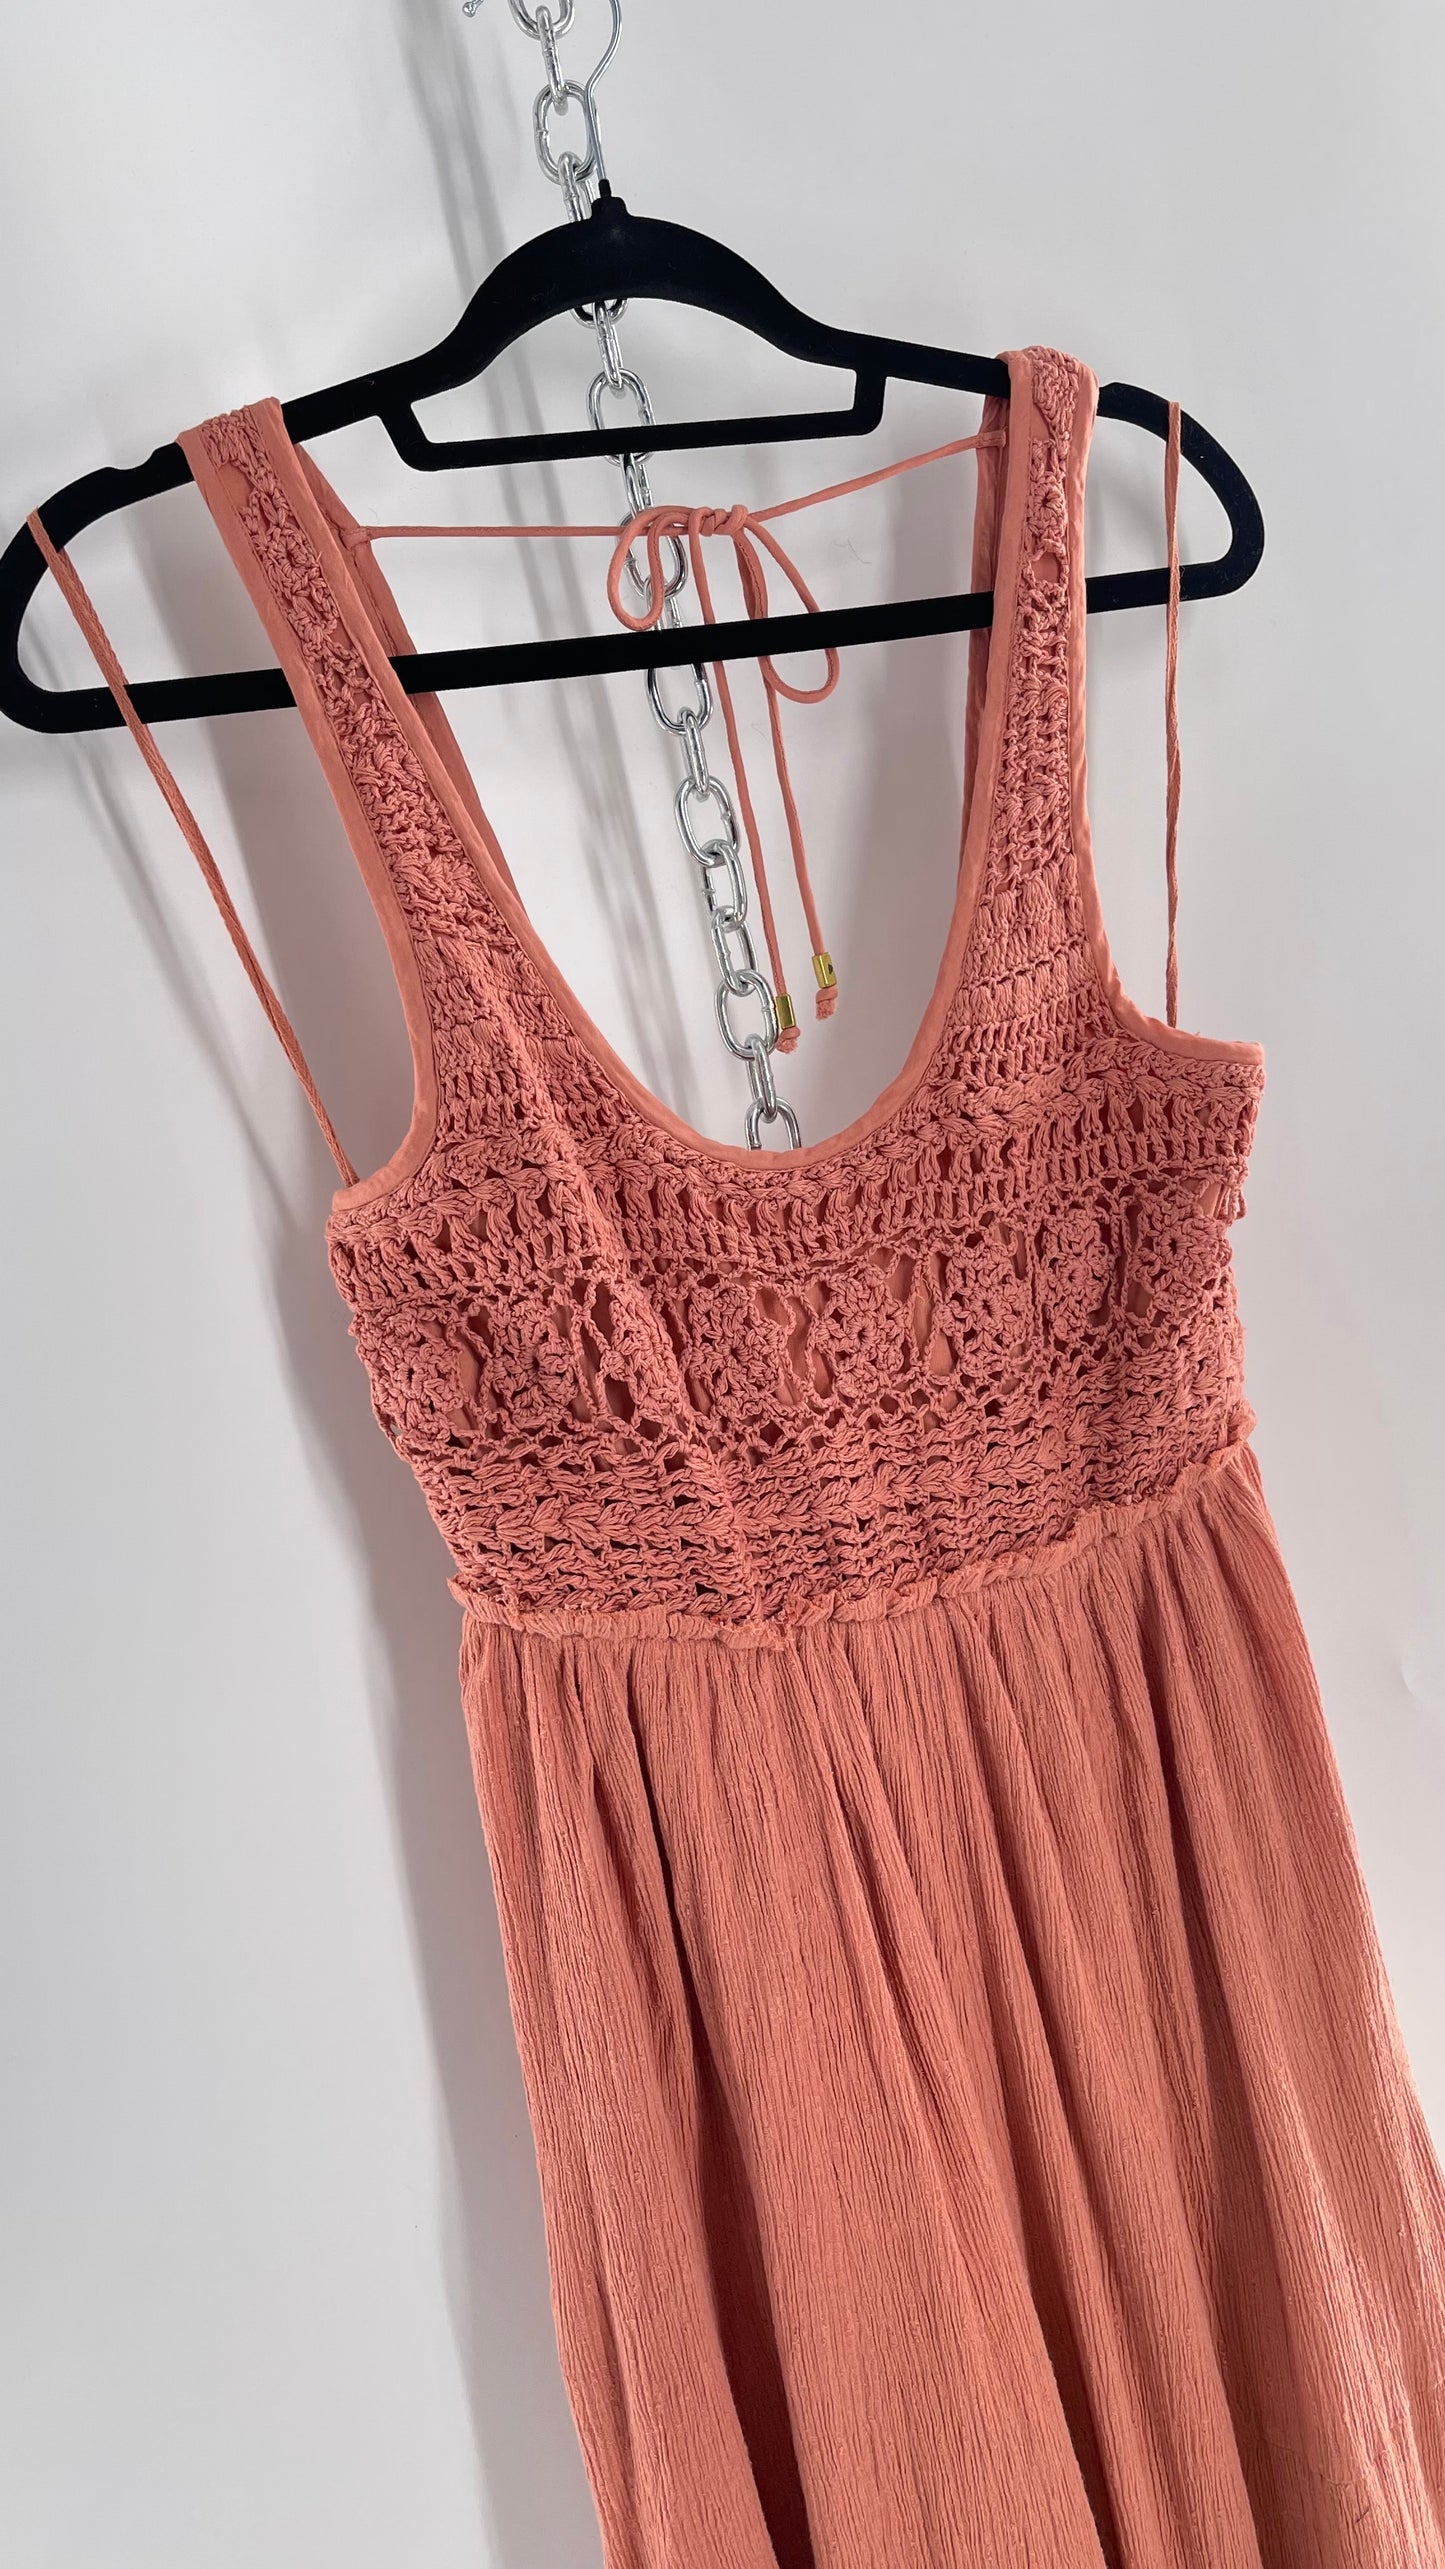 Free People Rose/Peach Pink Wide Leg Jumpsuit with Crochet Bust and Tags Attached (XS)